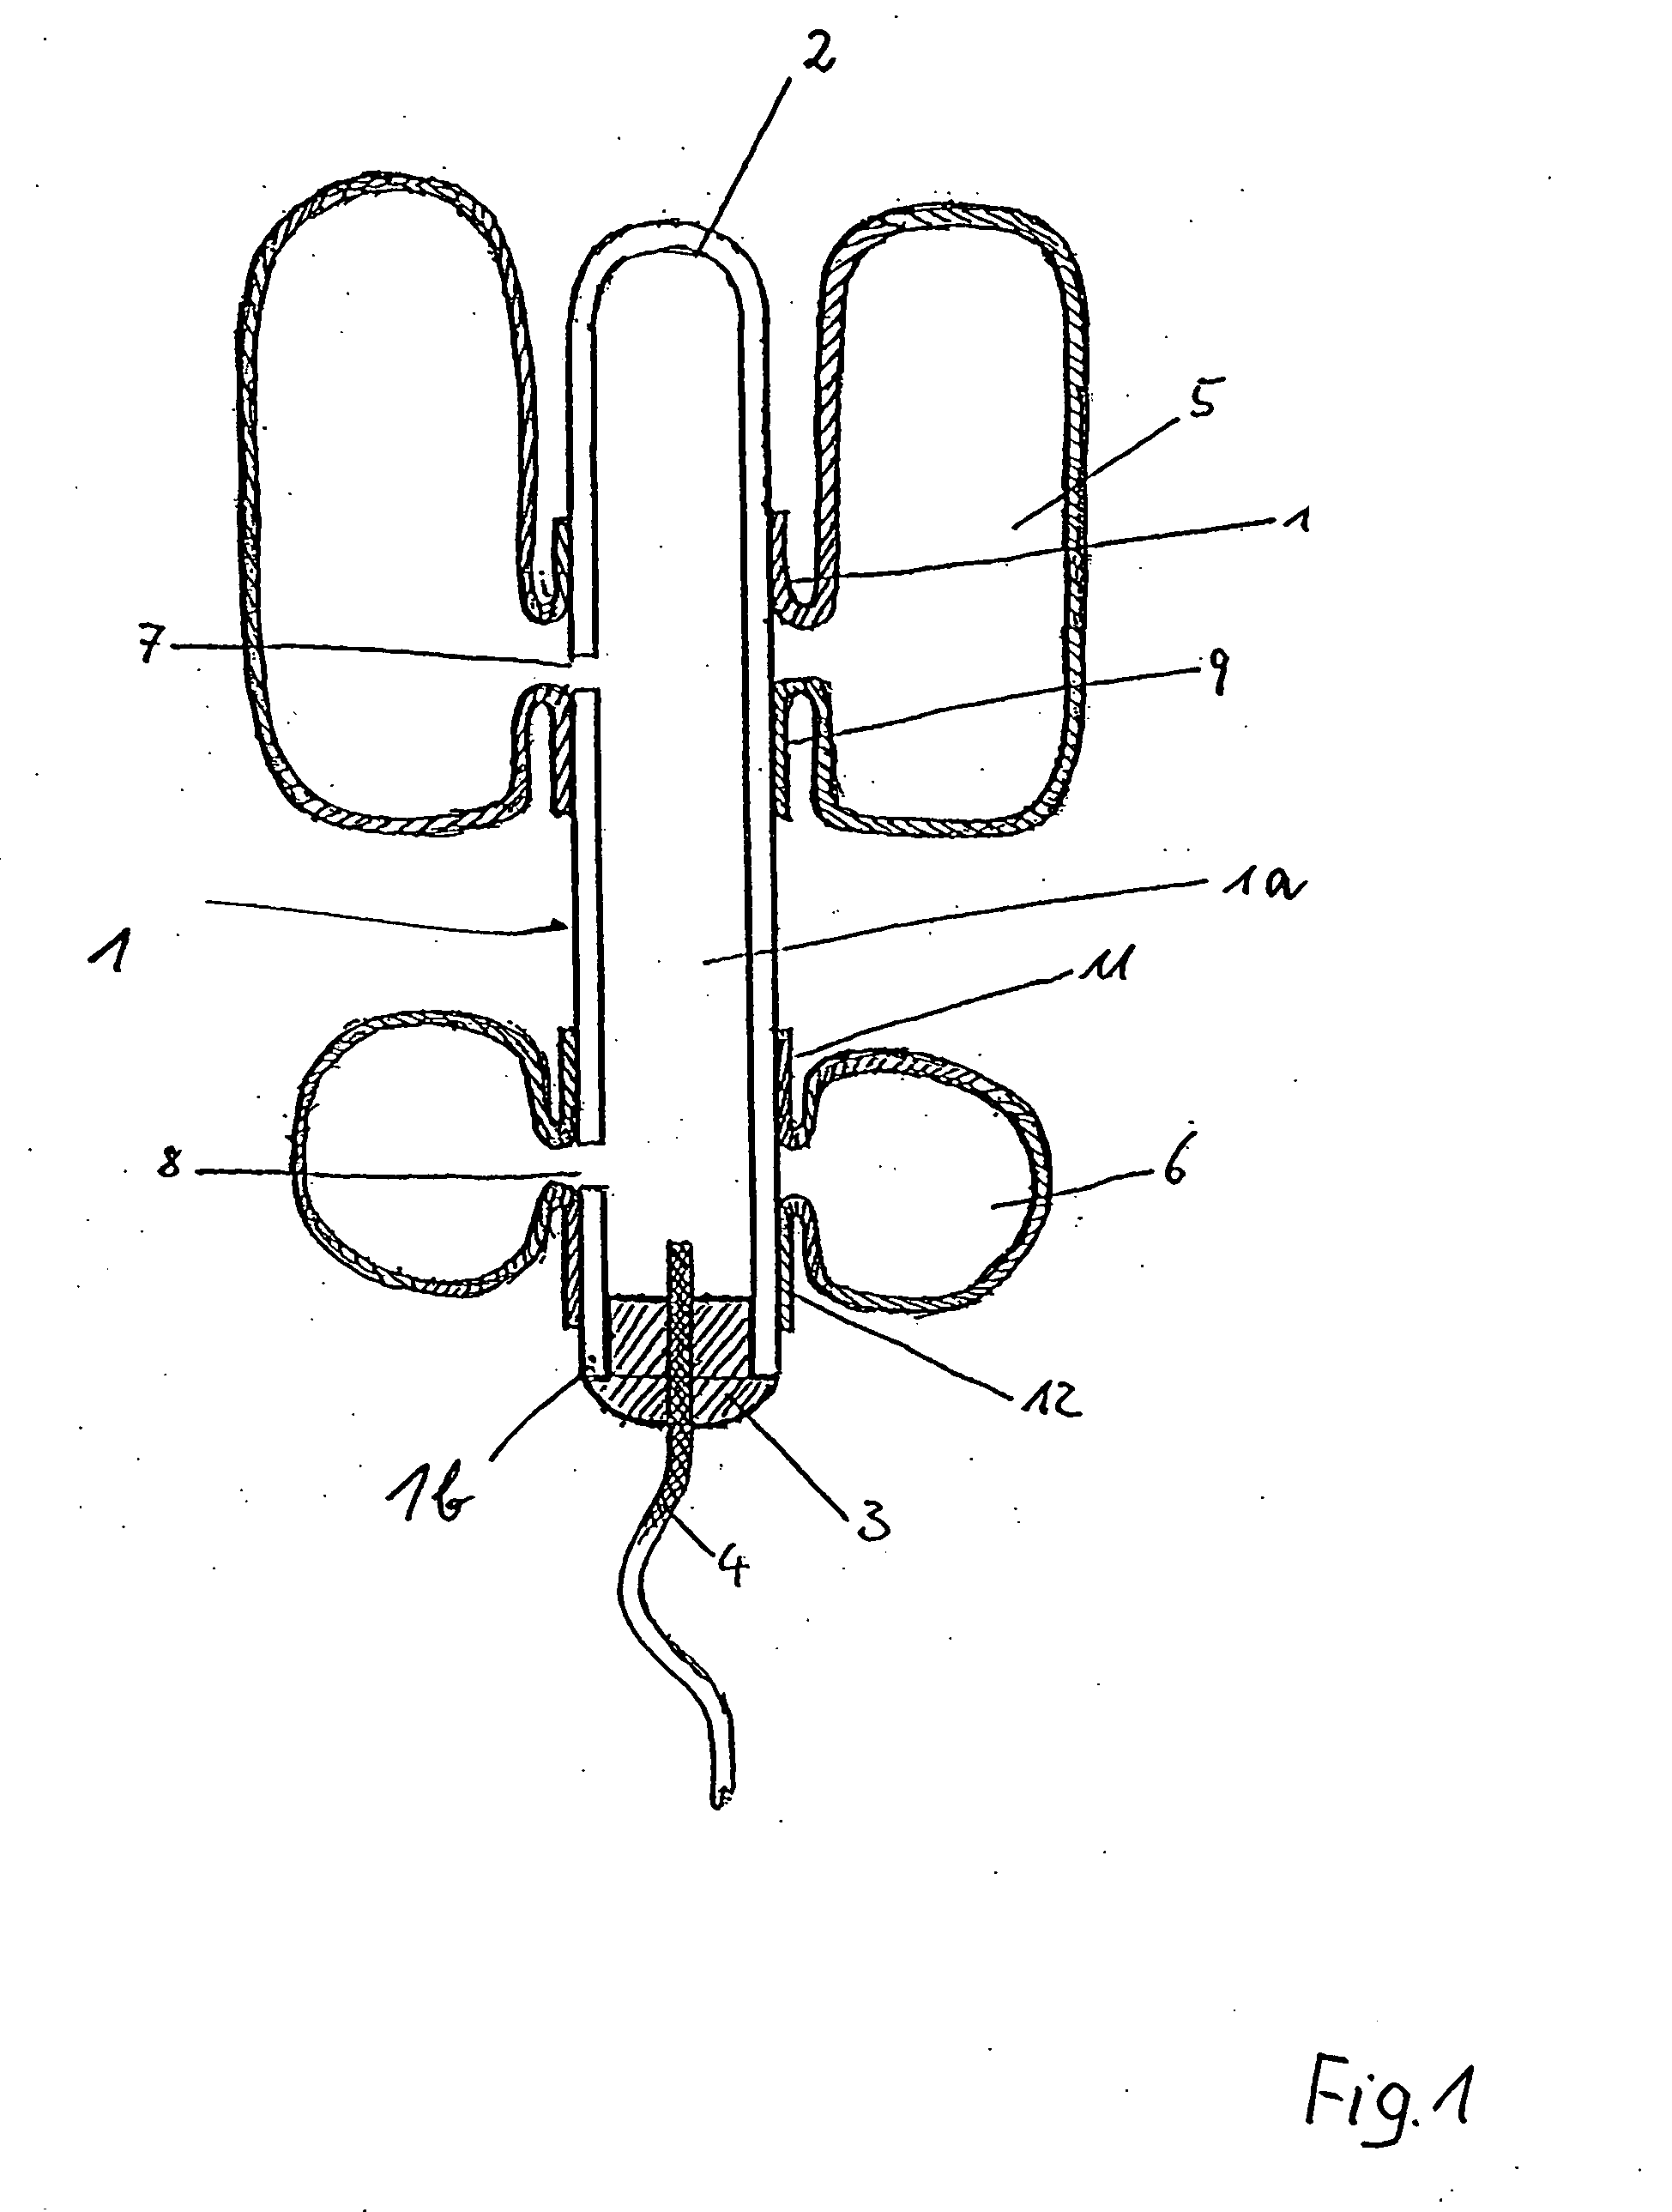 Closure system for managing rectal or anal incontinence